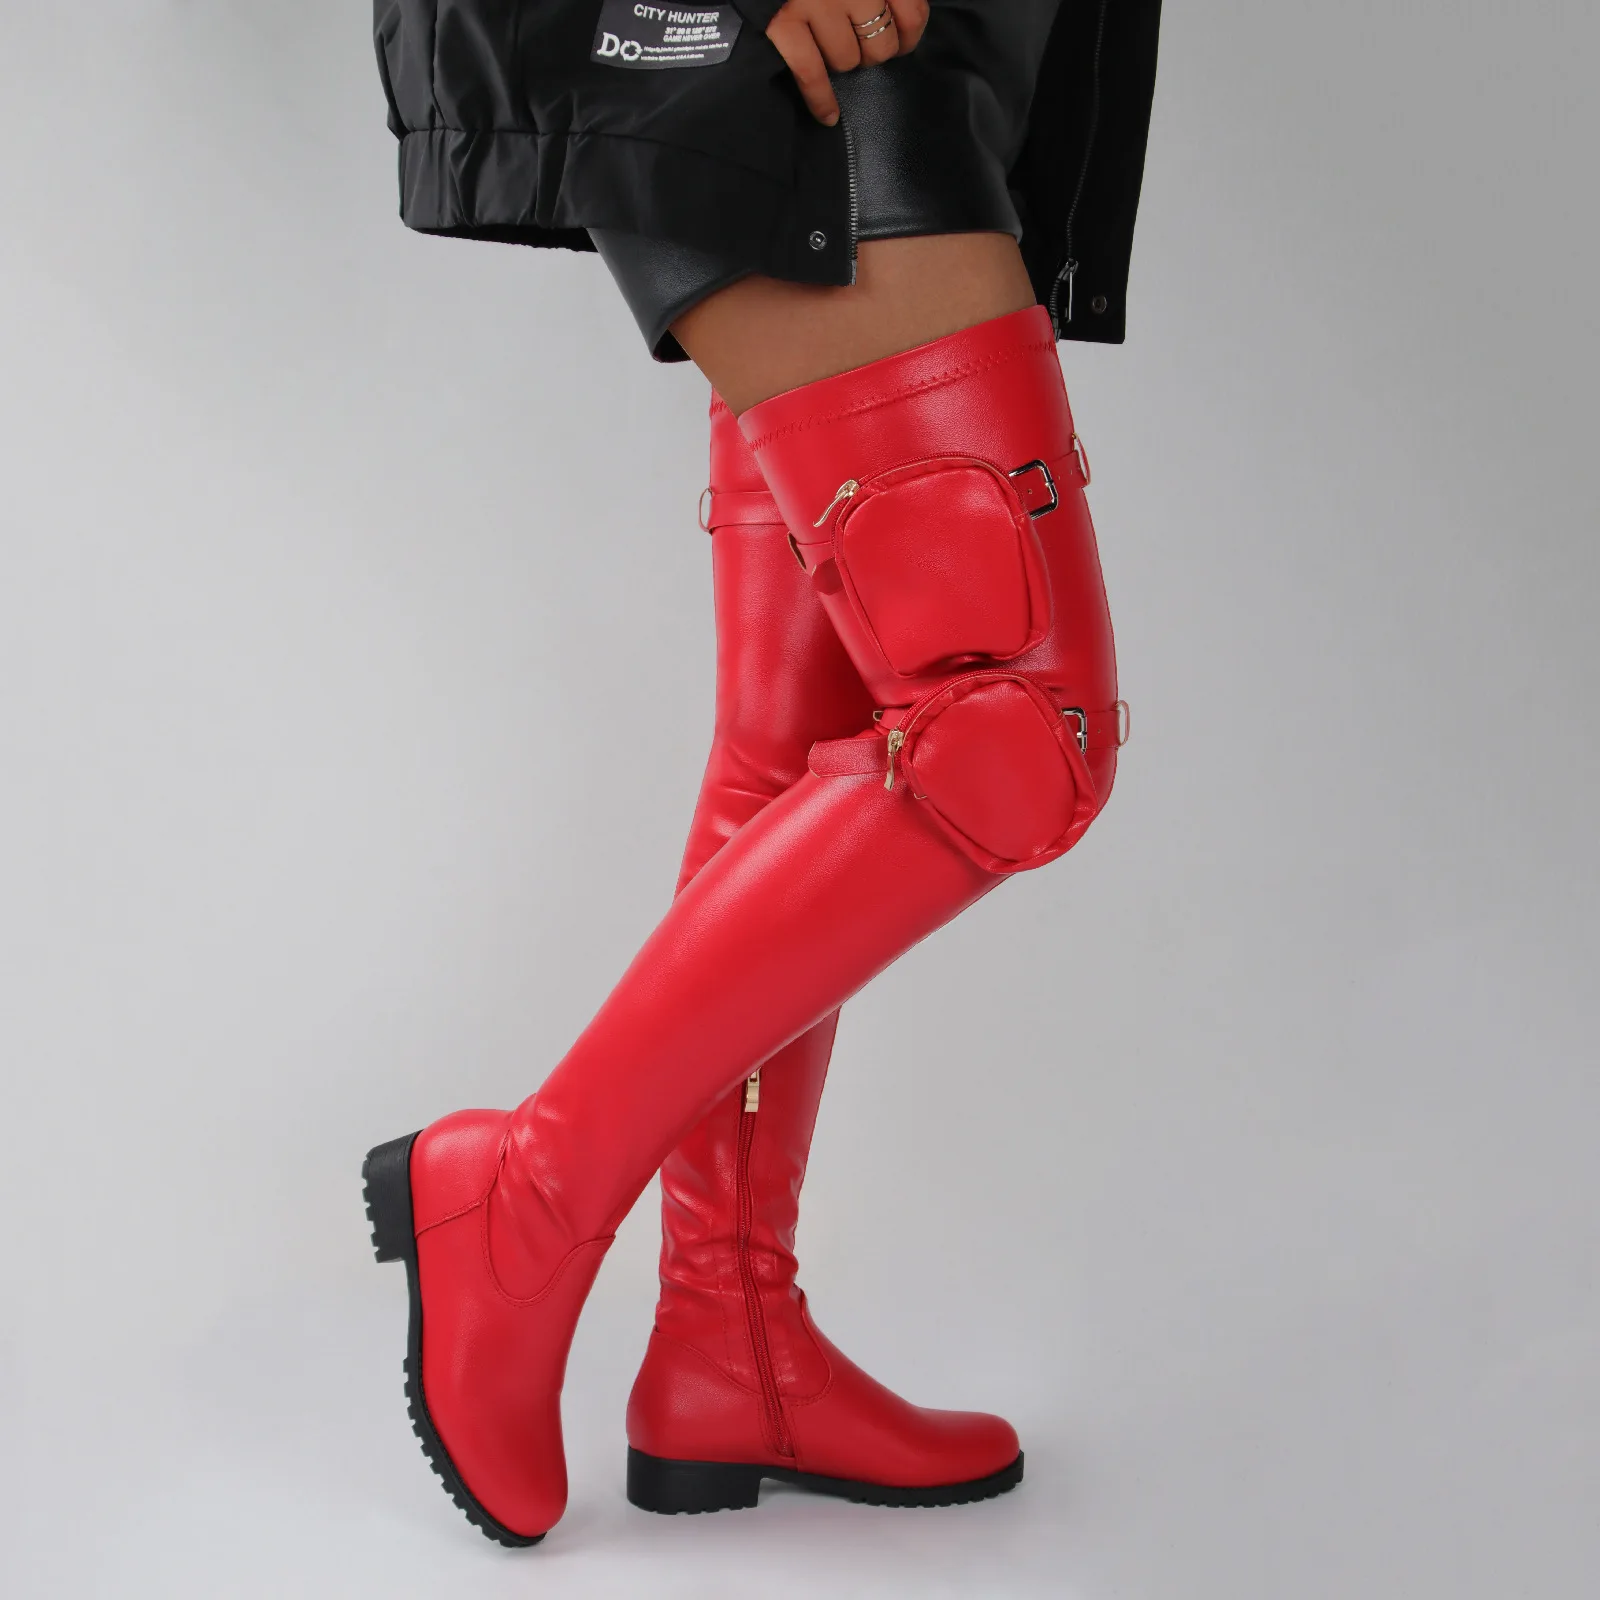 Busy Girl Mf1016 Big Size Boots For Women Women's Thigh High Boots With ...